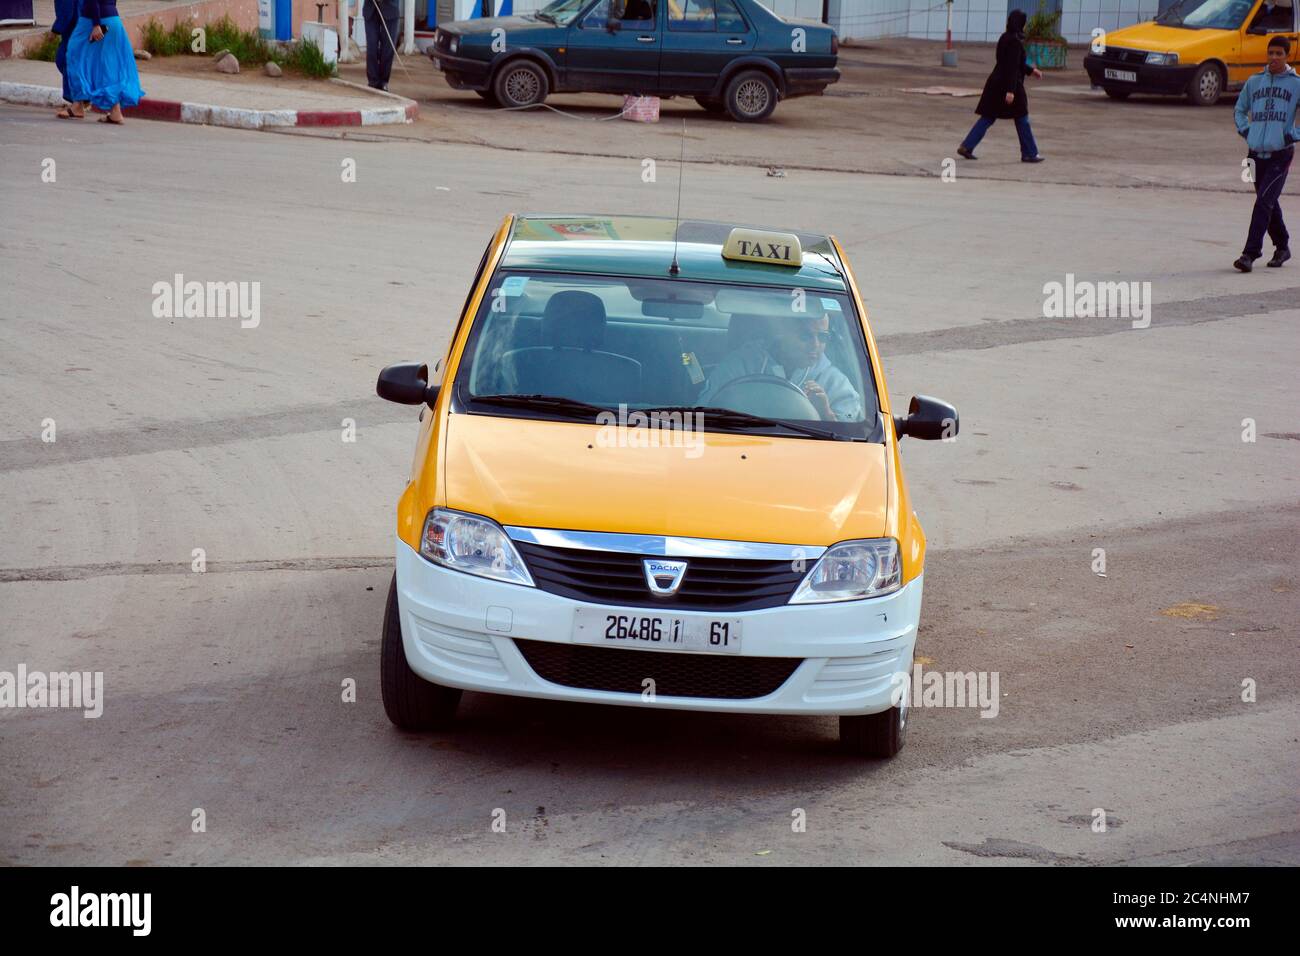 Beni Mellal, Morocco - November 23rd 2014: Unidentified people and Petit Taxi - traditional mode of transport up to four people, the cars have differe Stock Photo